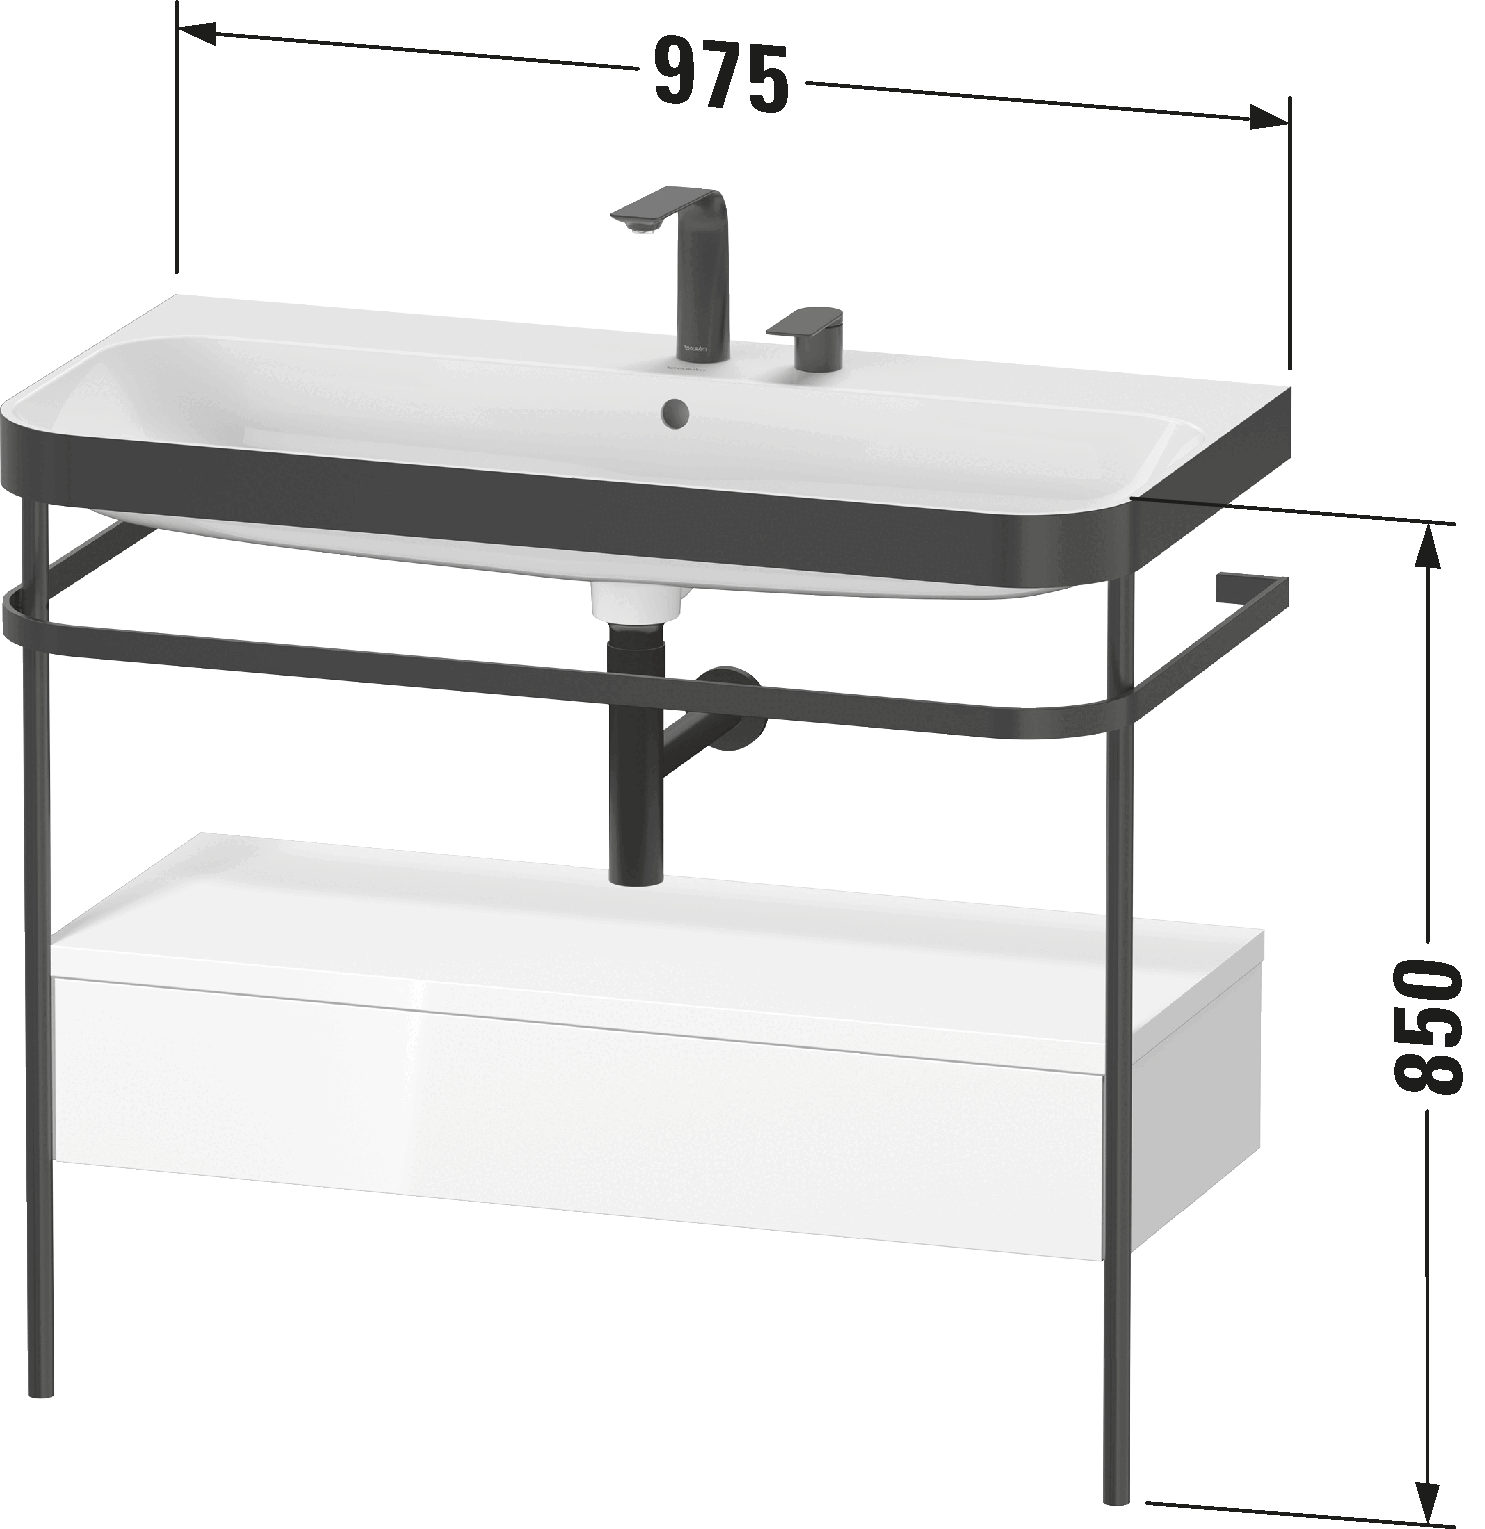 c-bonded set with metal console and drawer, HP4743 E/N/O